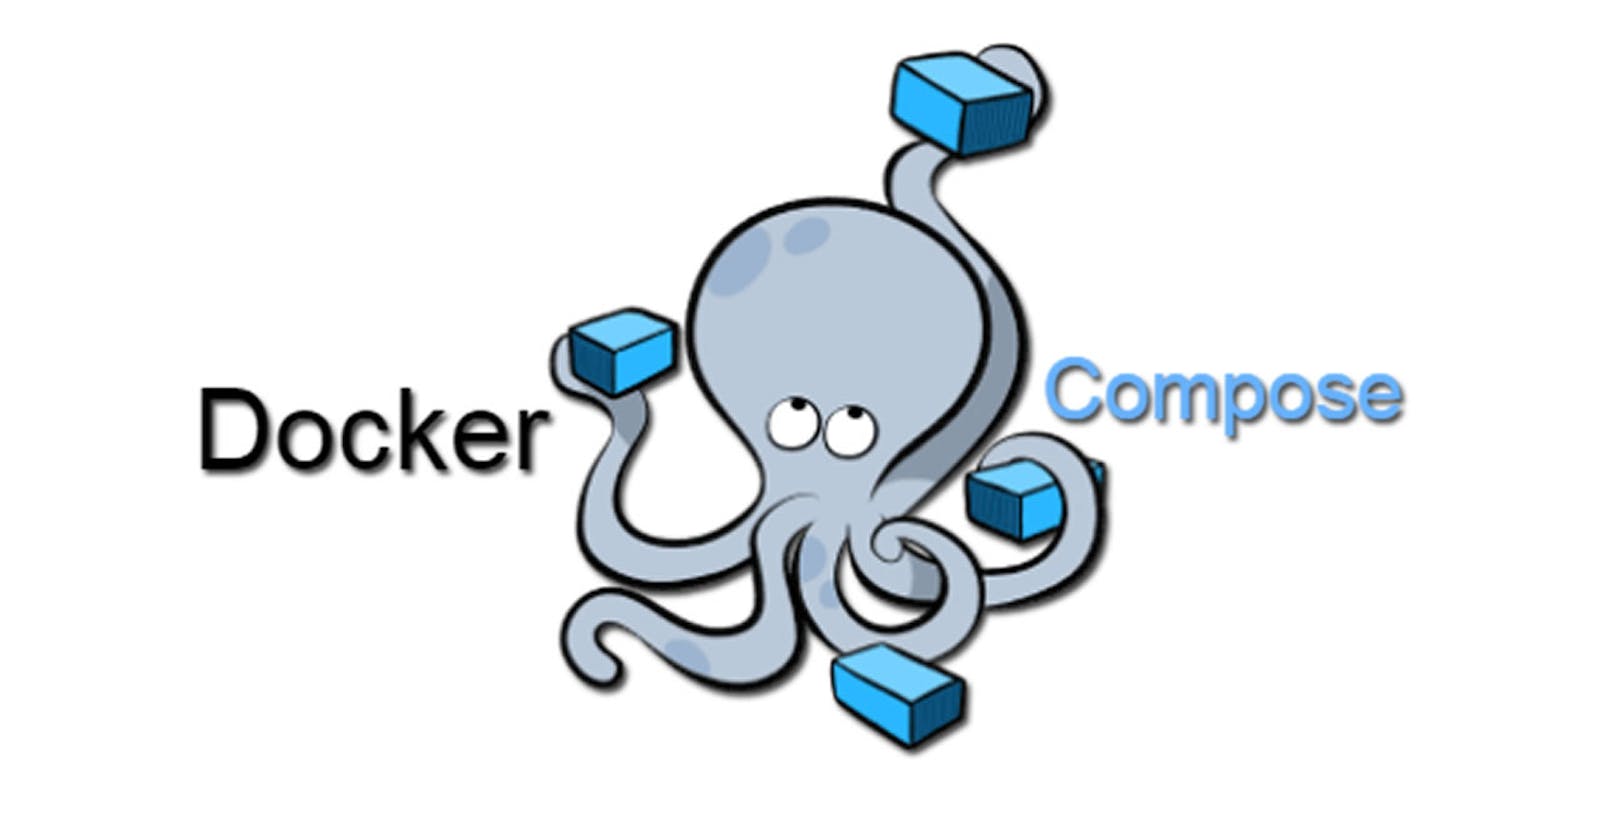 Deploy your project using docker-compose